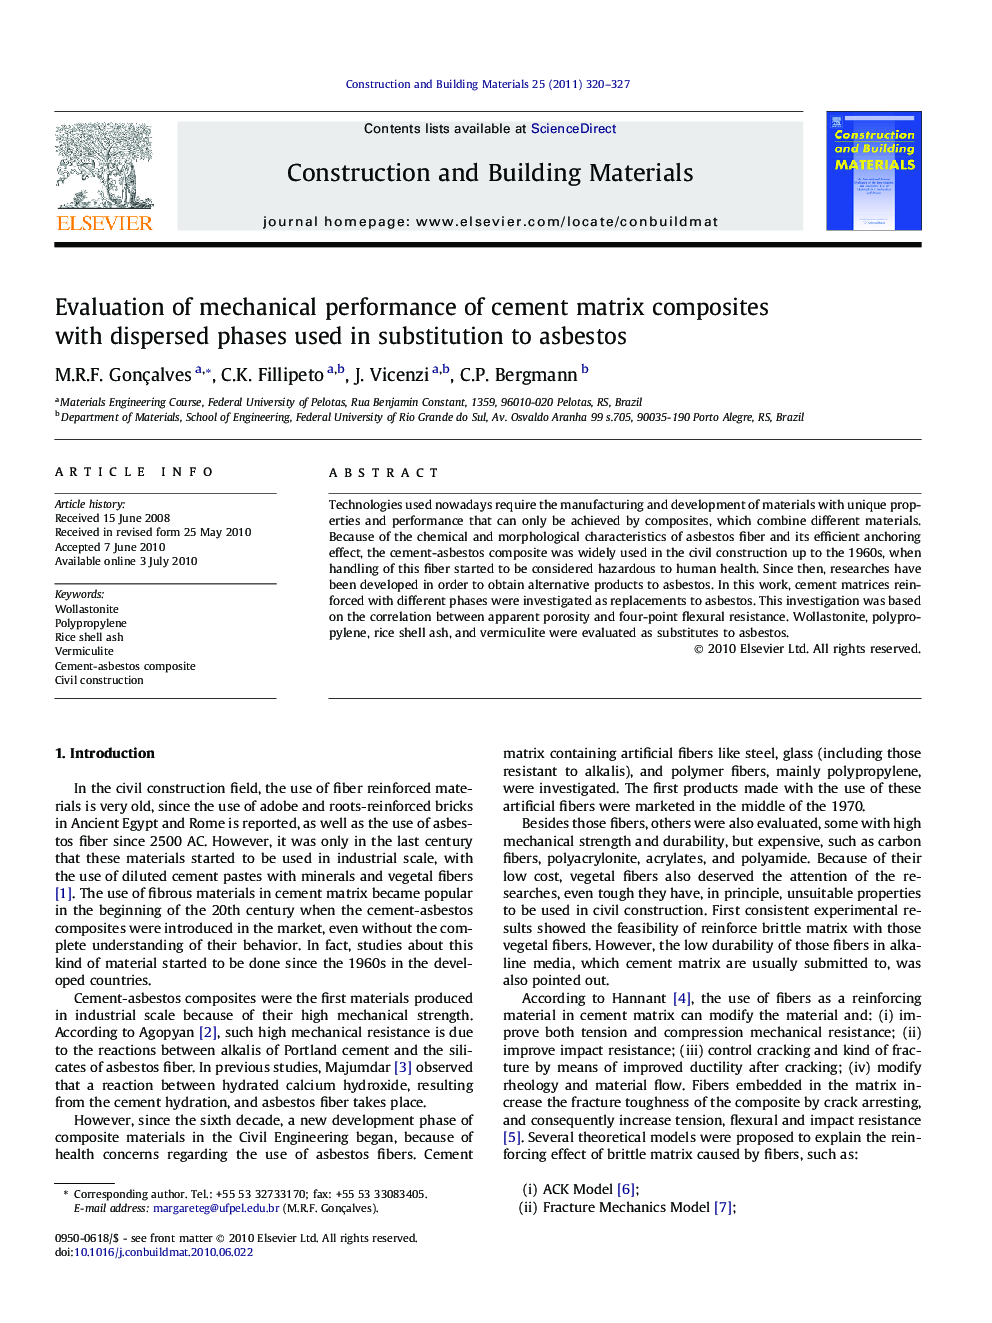 Evaluation of mechanical performance of cement matrix composites with dispersed phases used in substitution to asbestos